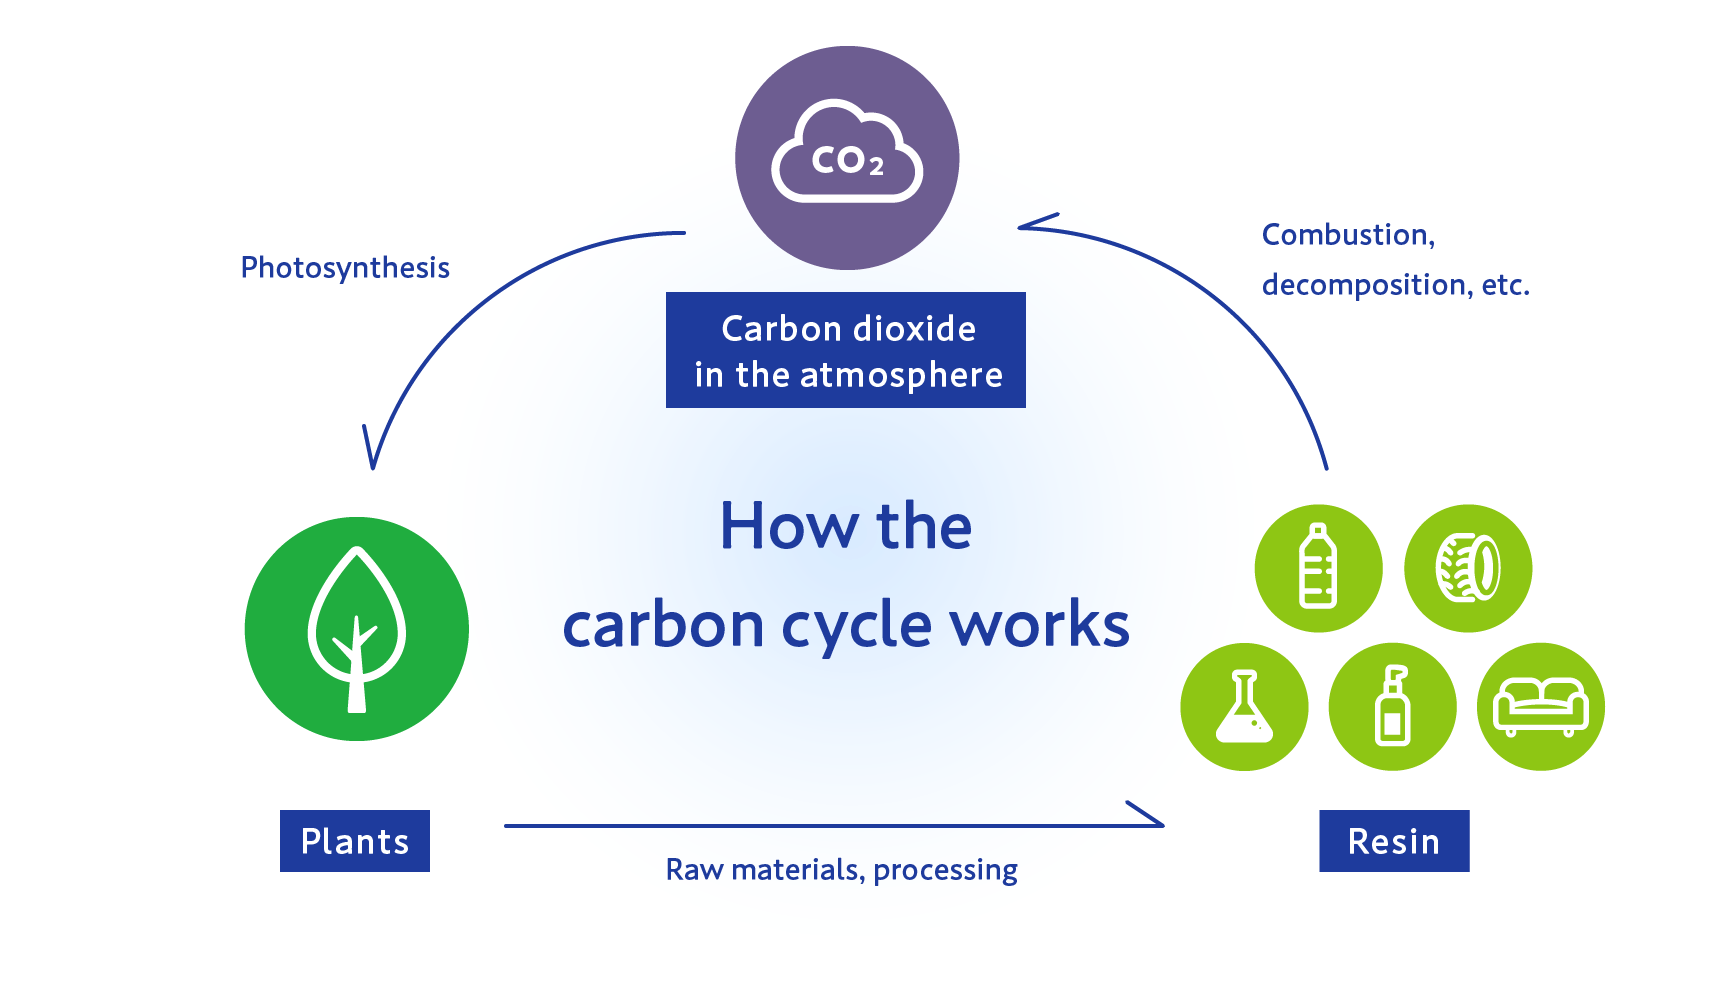 How the carbon cycle works